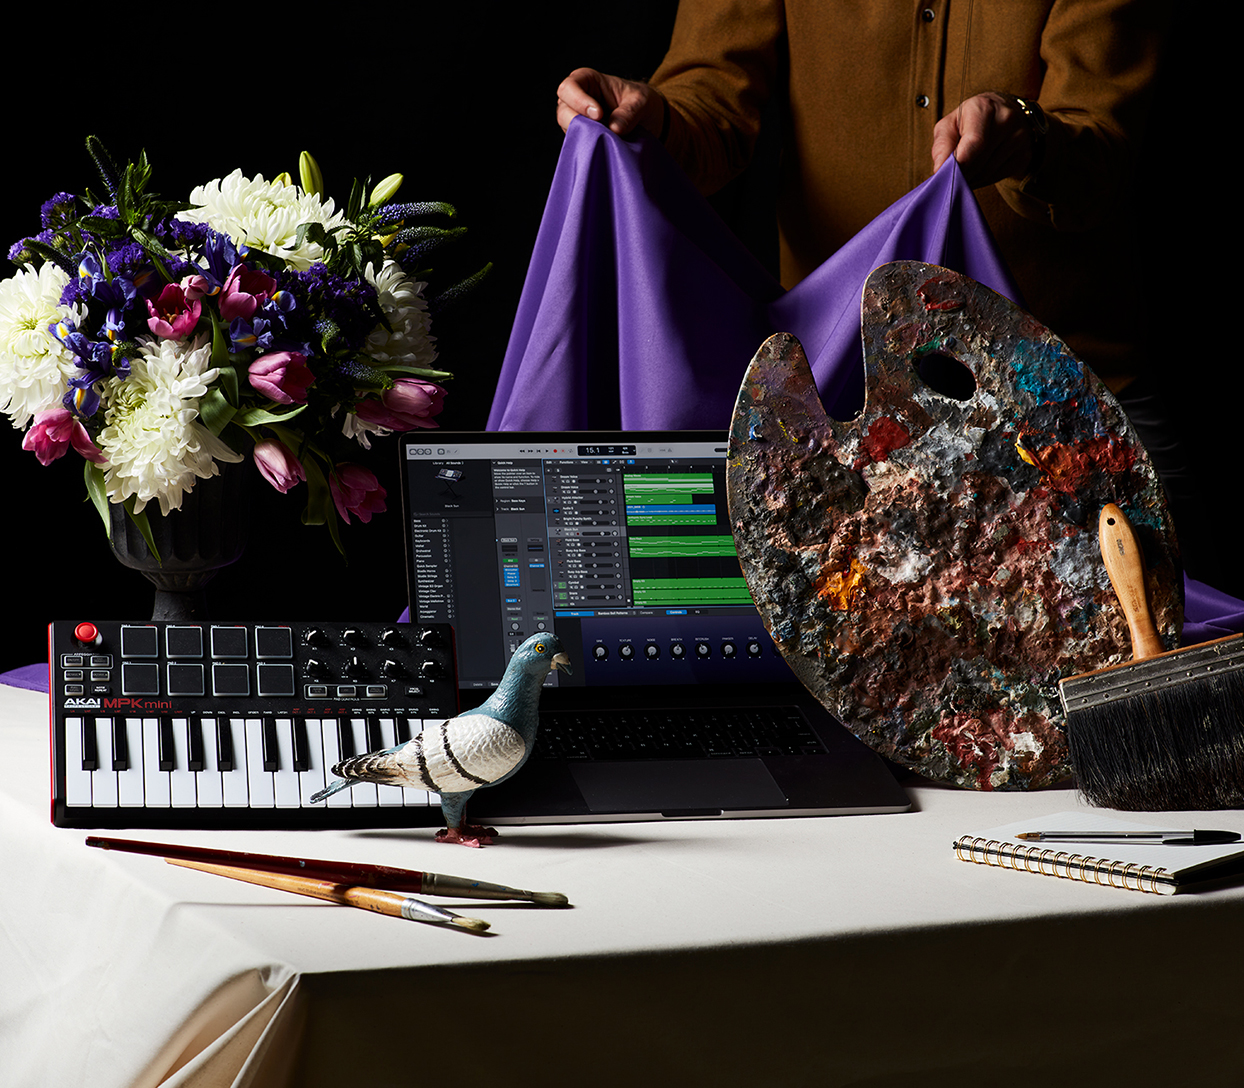 A creative still life composition featuring a MIDI keyboard, a pigeon statue, a painter’s palette, paintbrushes, flowers in a vase, and a laptop displaying music production software. A person holds purple fabric in the background.